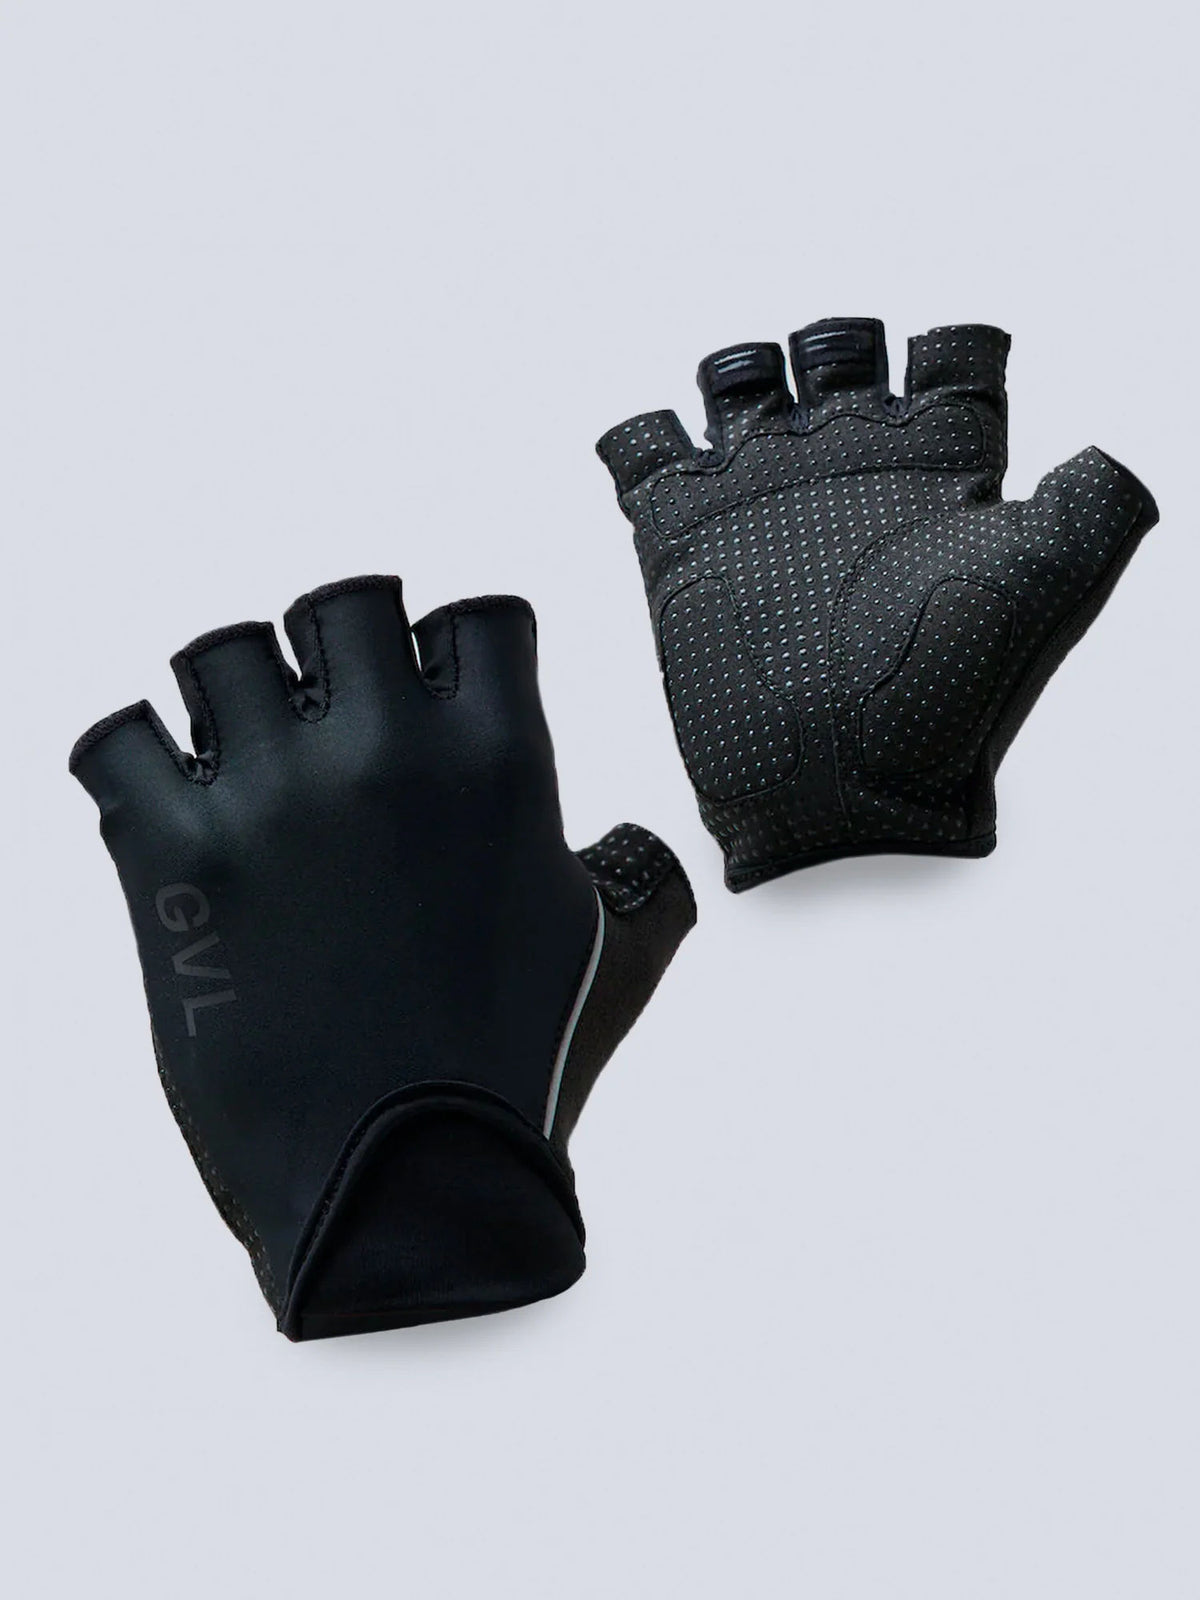 GVL GLOVES BLACKOUT サイクル グローブ | GEARED